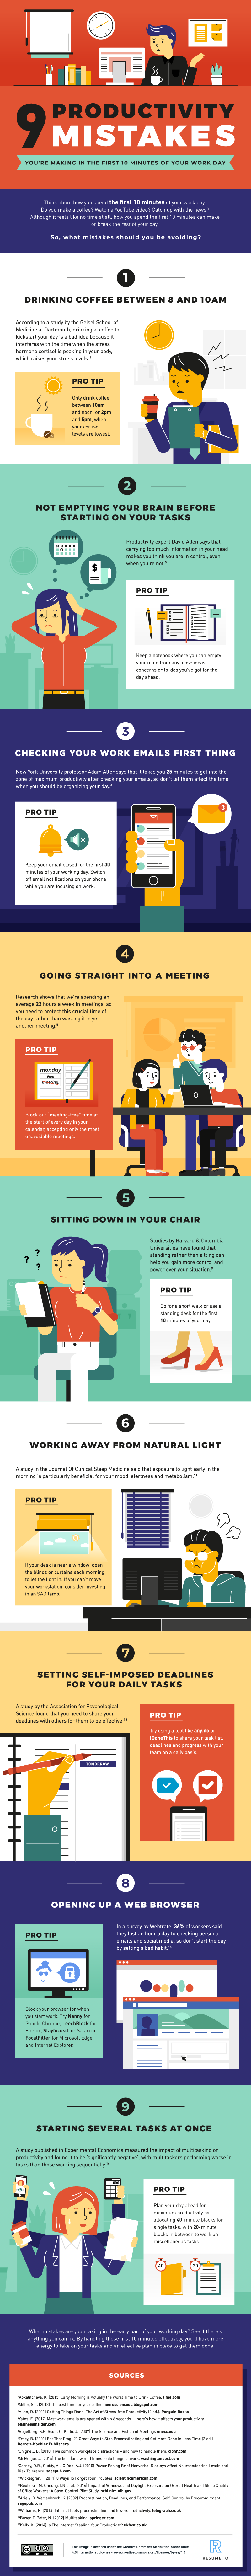 Infographic Productivity Mistakes